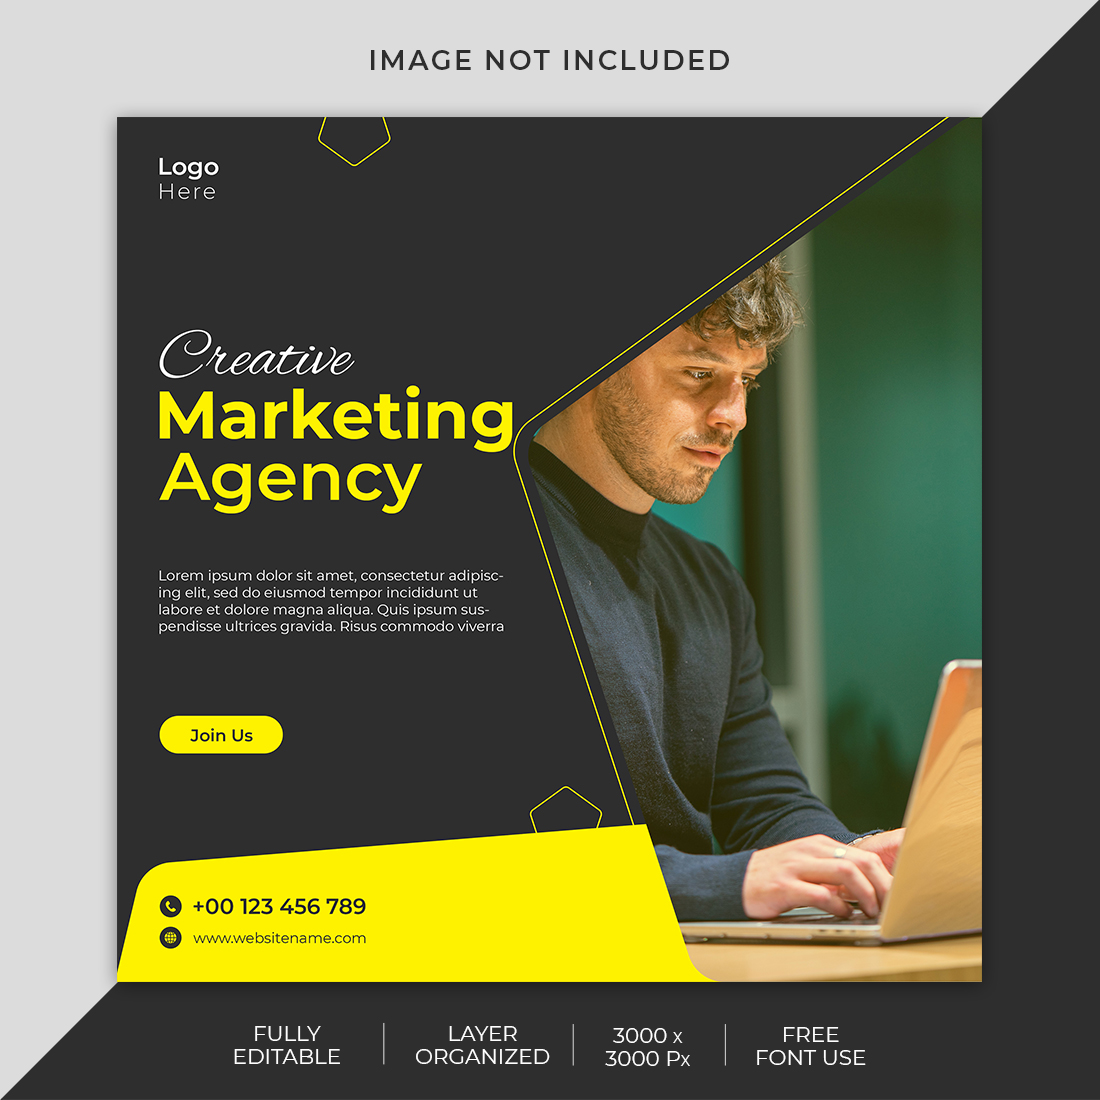 Creative Marketing Agency Social Media Post Template cover image.